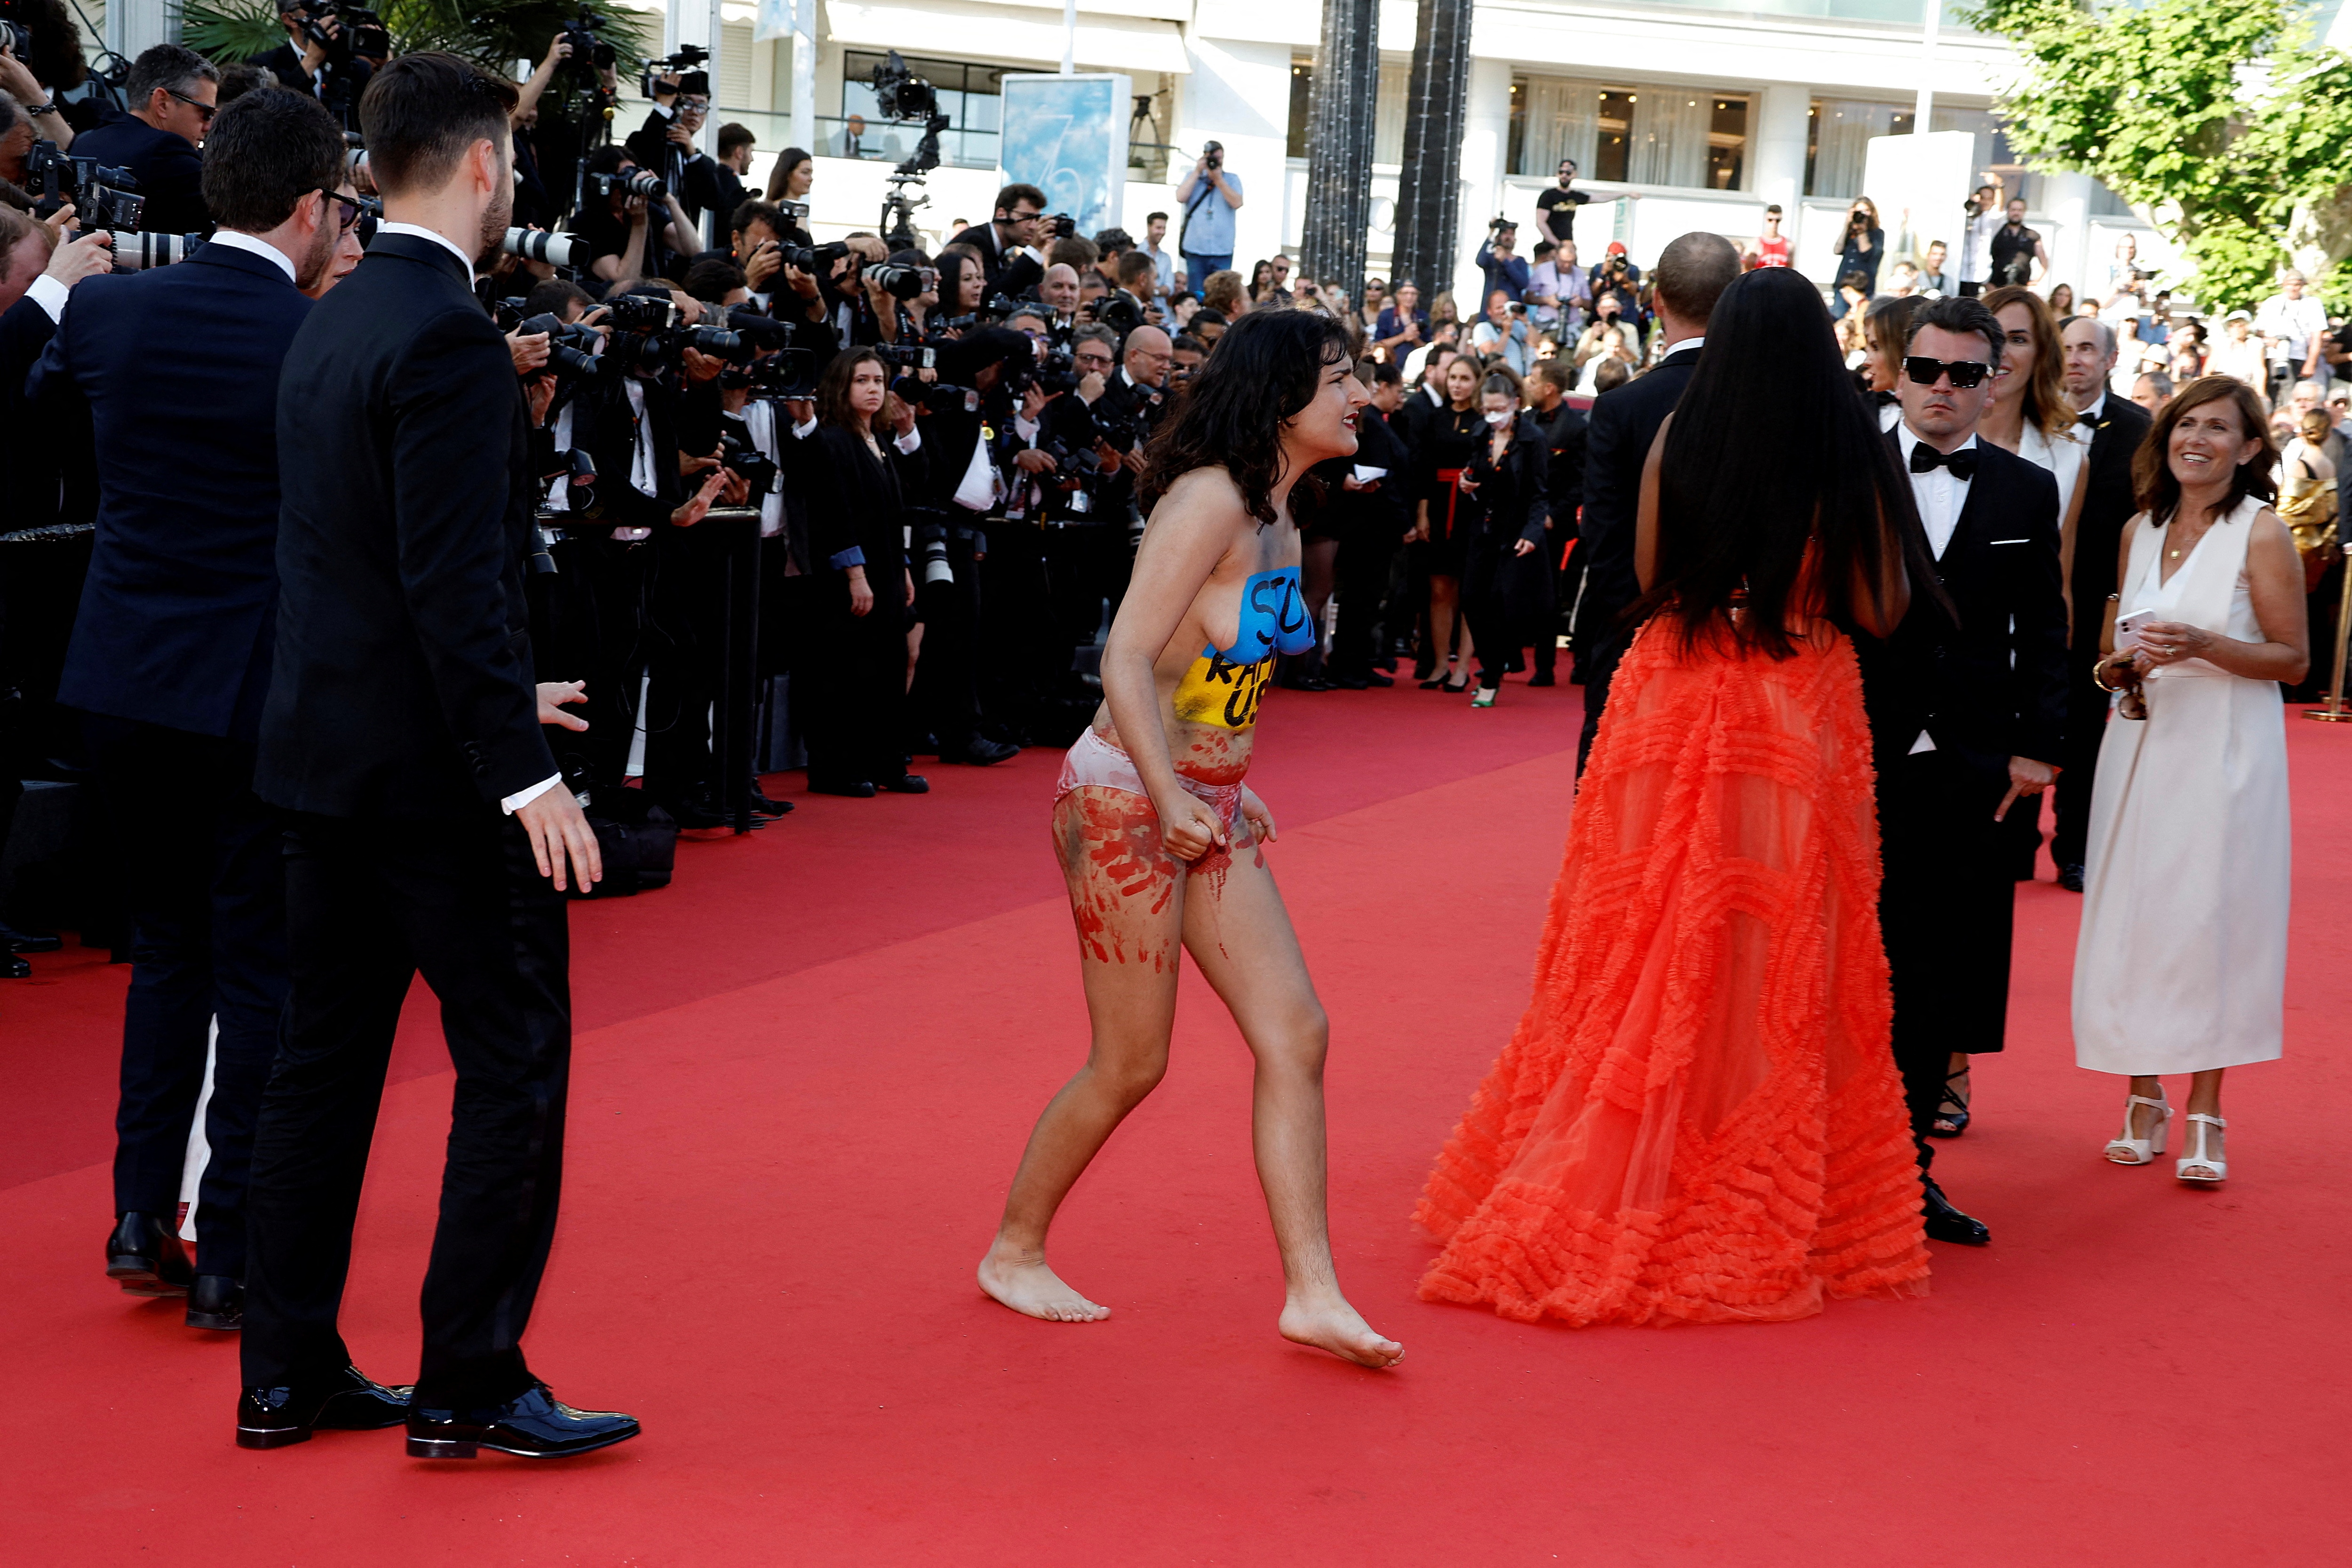 The 75th Cannes Film Festival - Screening of the film "Three Thousand Years of Longing" Out of Competition - Red Carpet Arrivals - Cannes, France, May 20, 2022. A woman with her bare chest painted in the colors of the Ukrainian flag protests. Writing on her chest reads: "Stop raping us". REUTERS/Eric Gaillard(REUTERS)